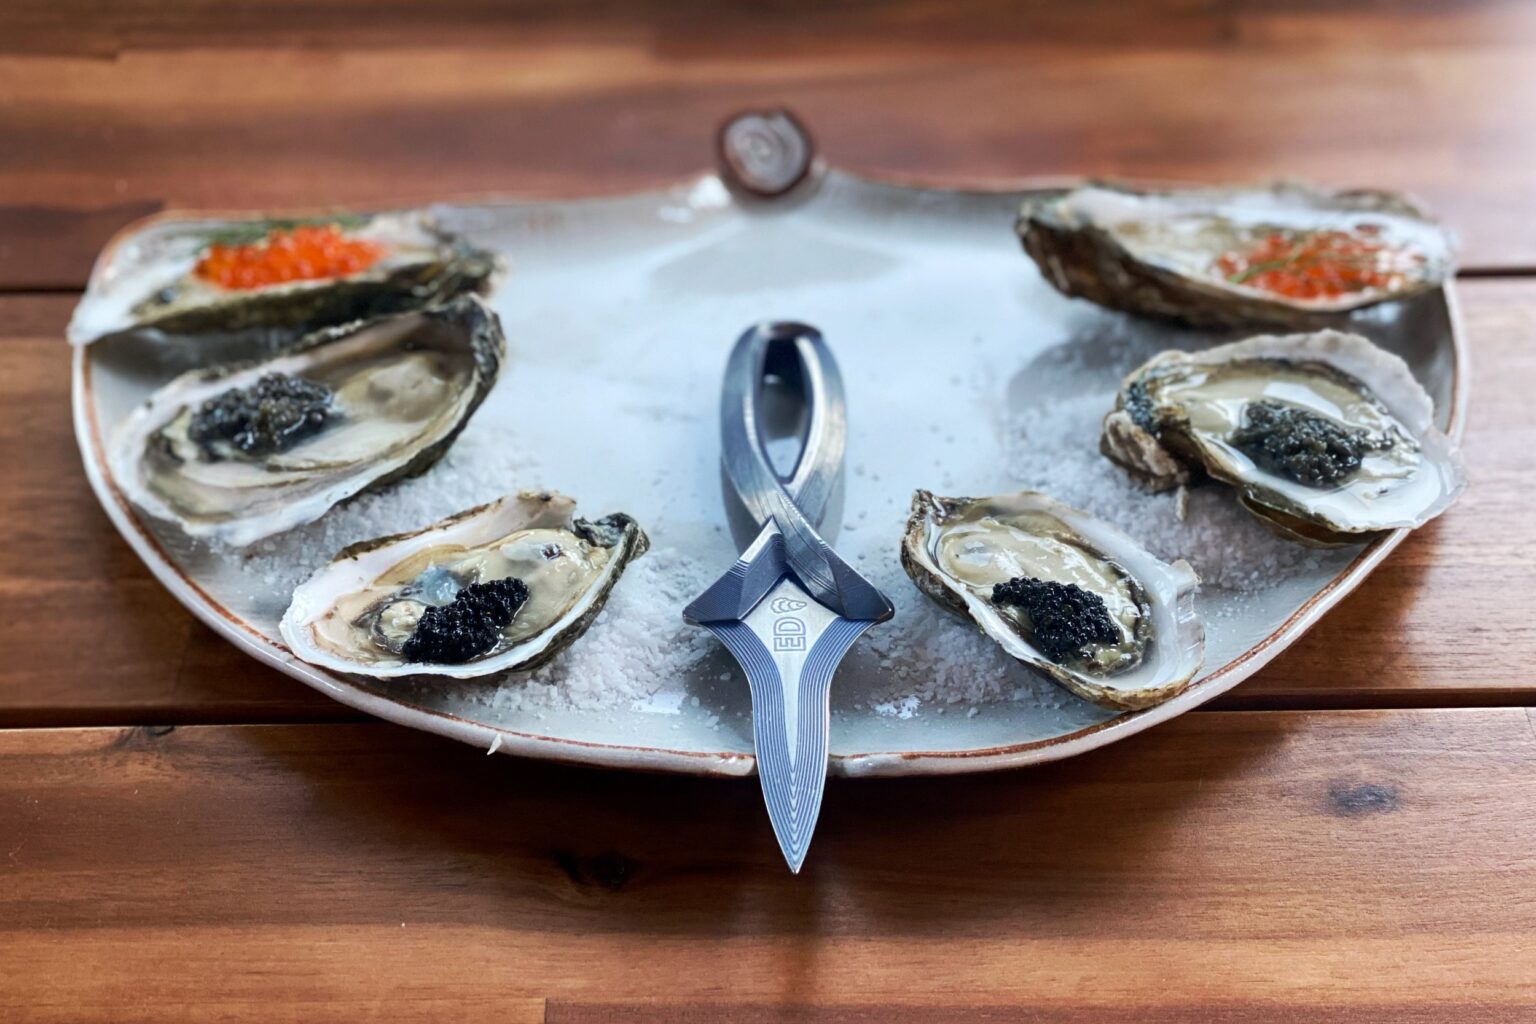 Meet the World’s First Full-Titanium Oyster Knife | Made for the New Circular Economy